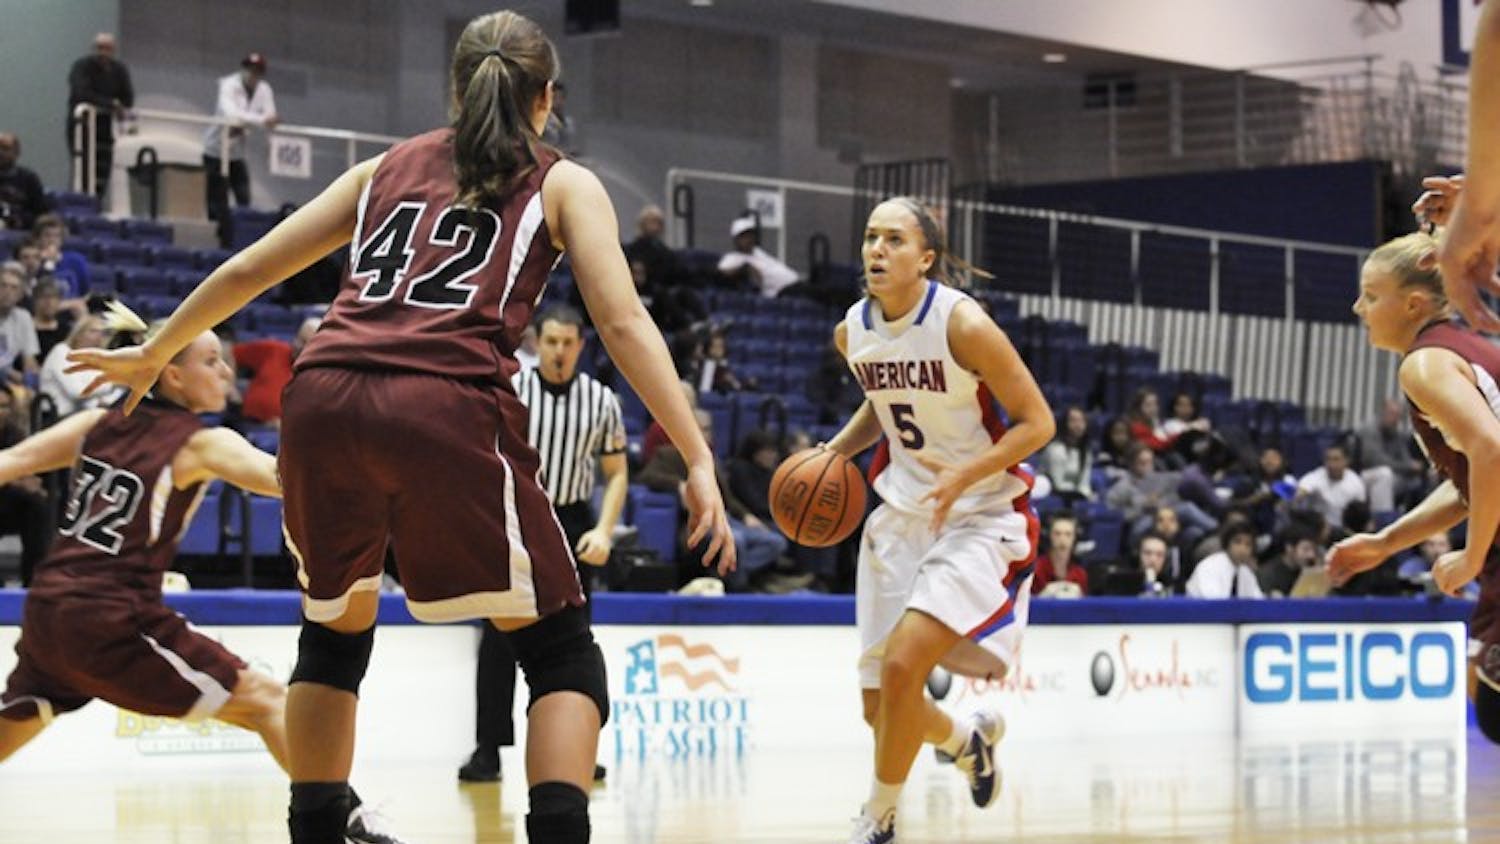 Michelle Kirk during a game last month against Indiana University of Pennsylvania.